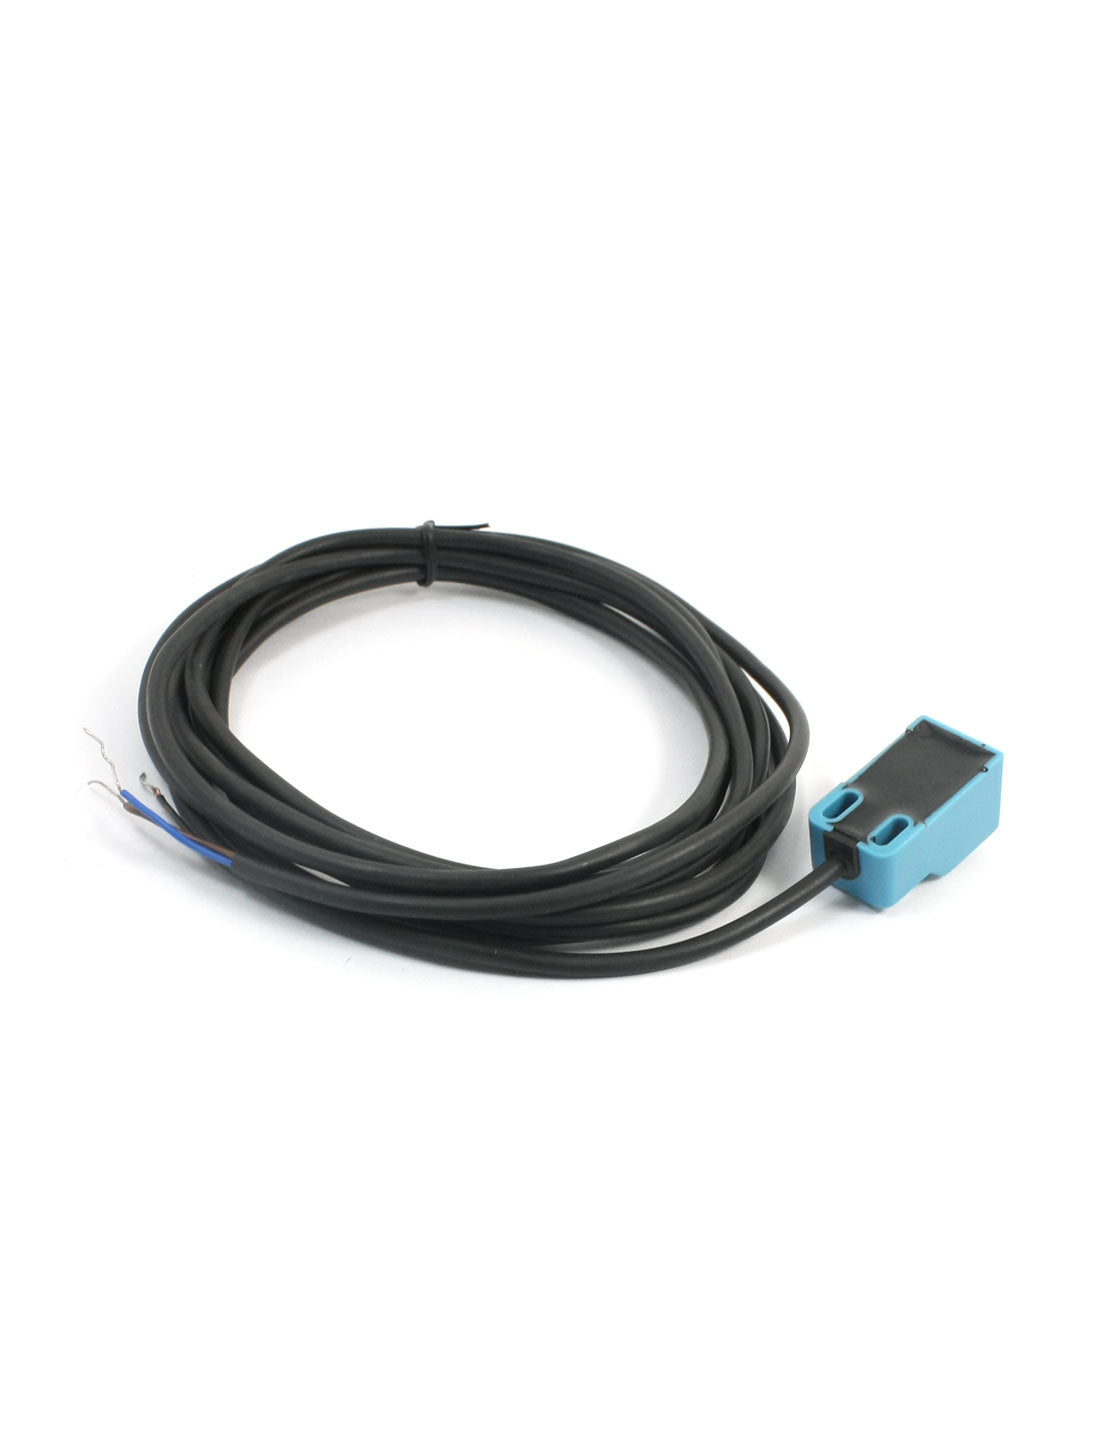 uxcell Uxcell SN04-N 3-Wire NPN NO 4mm Approach Detect Inductive Sensor Proximity Switch DC 10-30V 200 mA